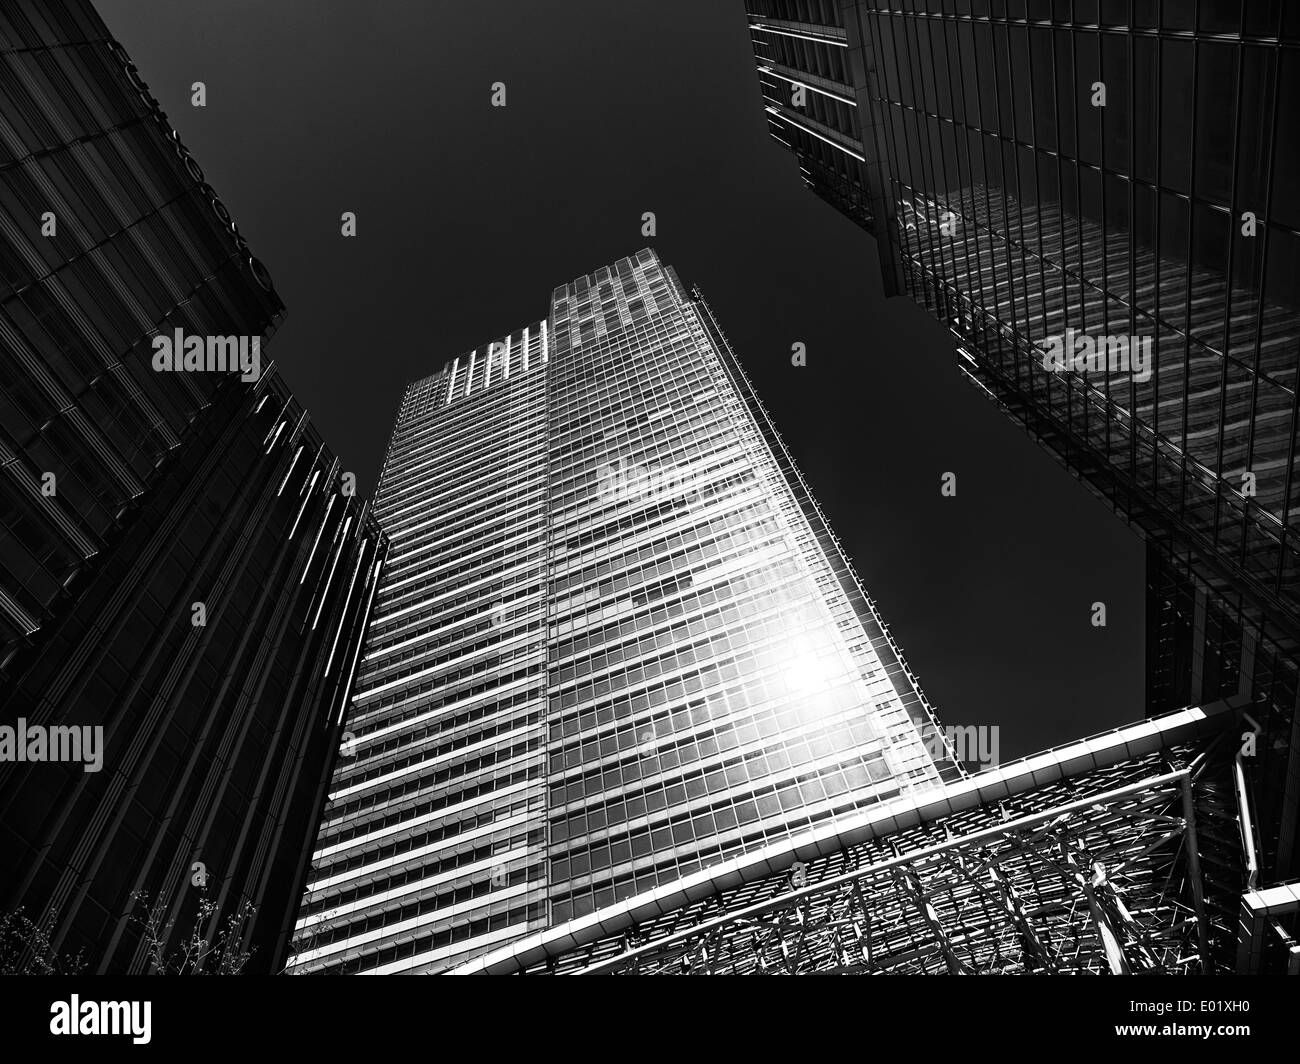 Tokyo Midtown complex high-rise buildings. Roppongi, Tokyo, Japan. Artistic black and white photo. Stock Photo